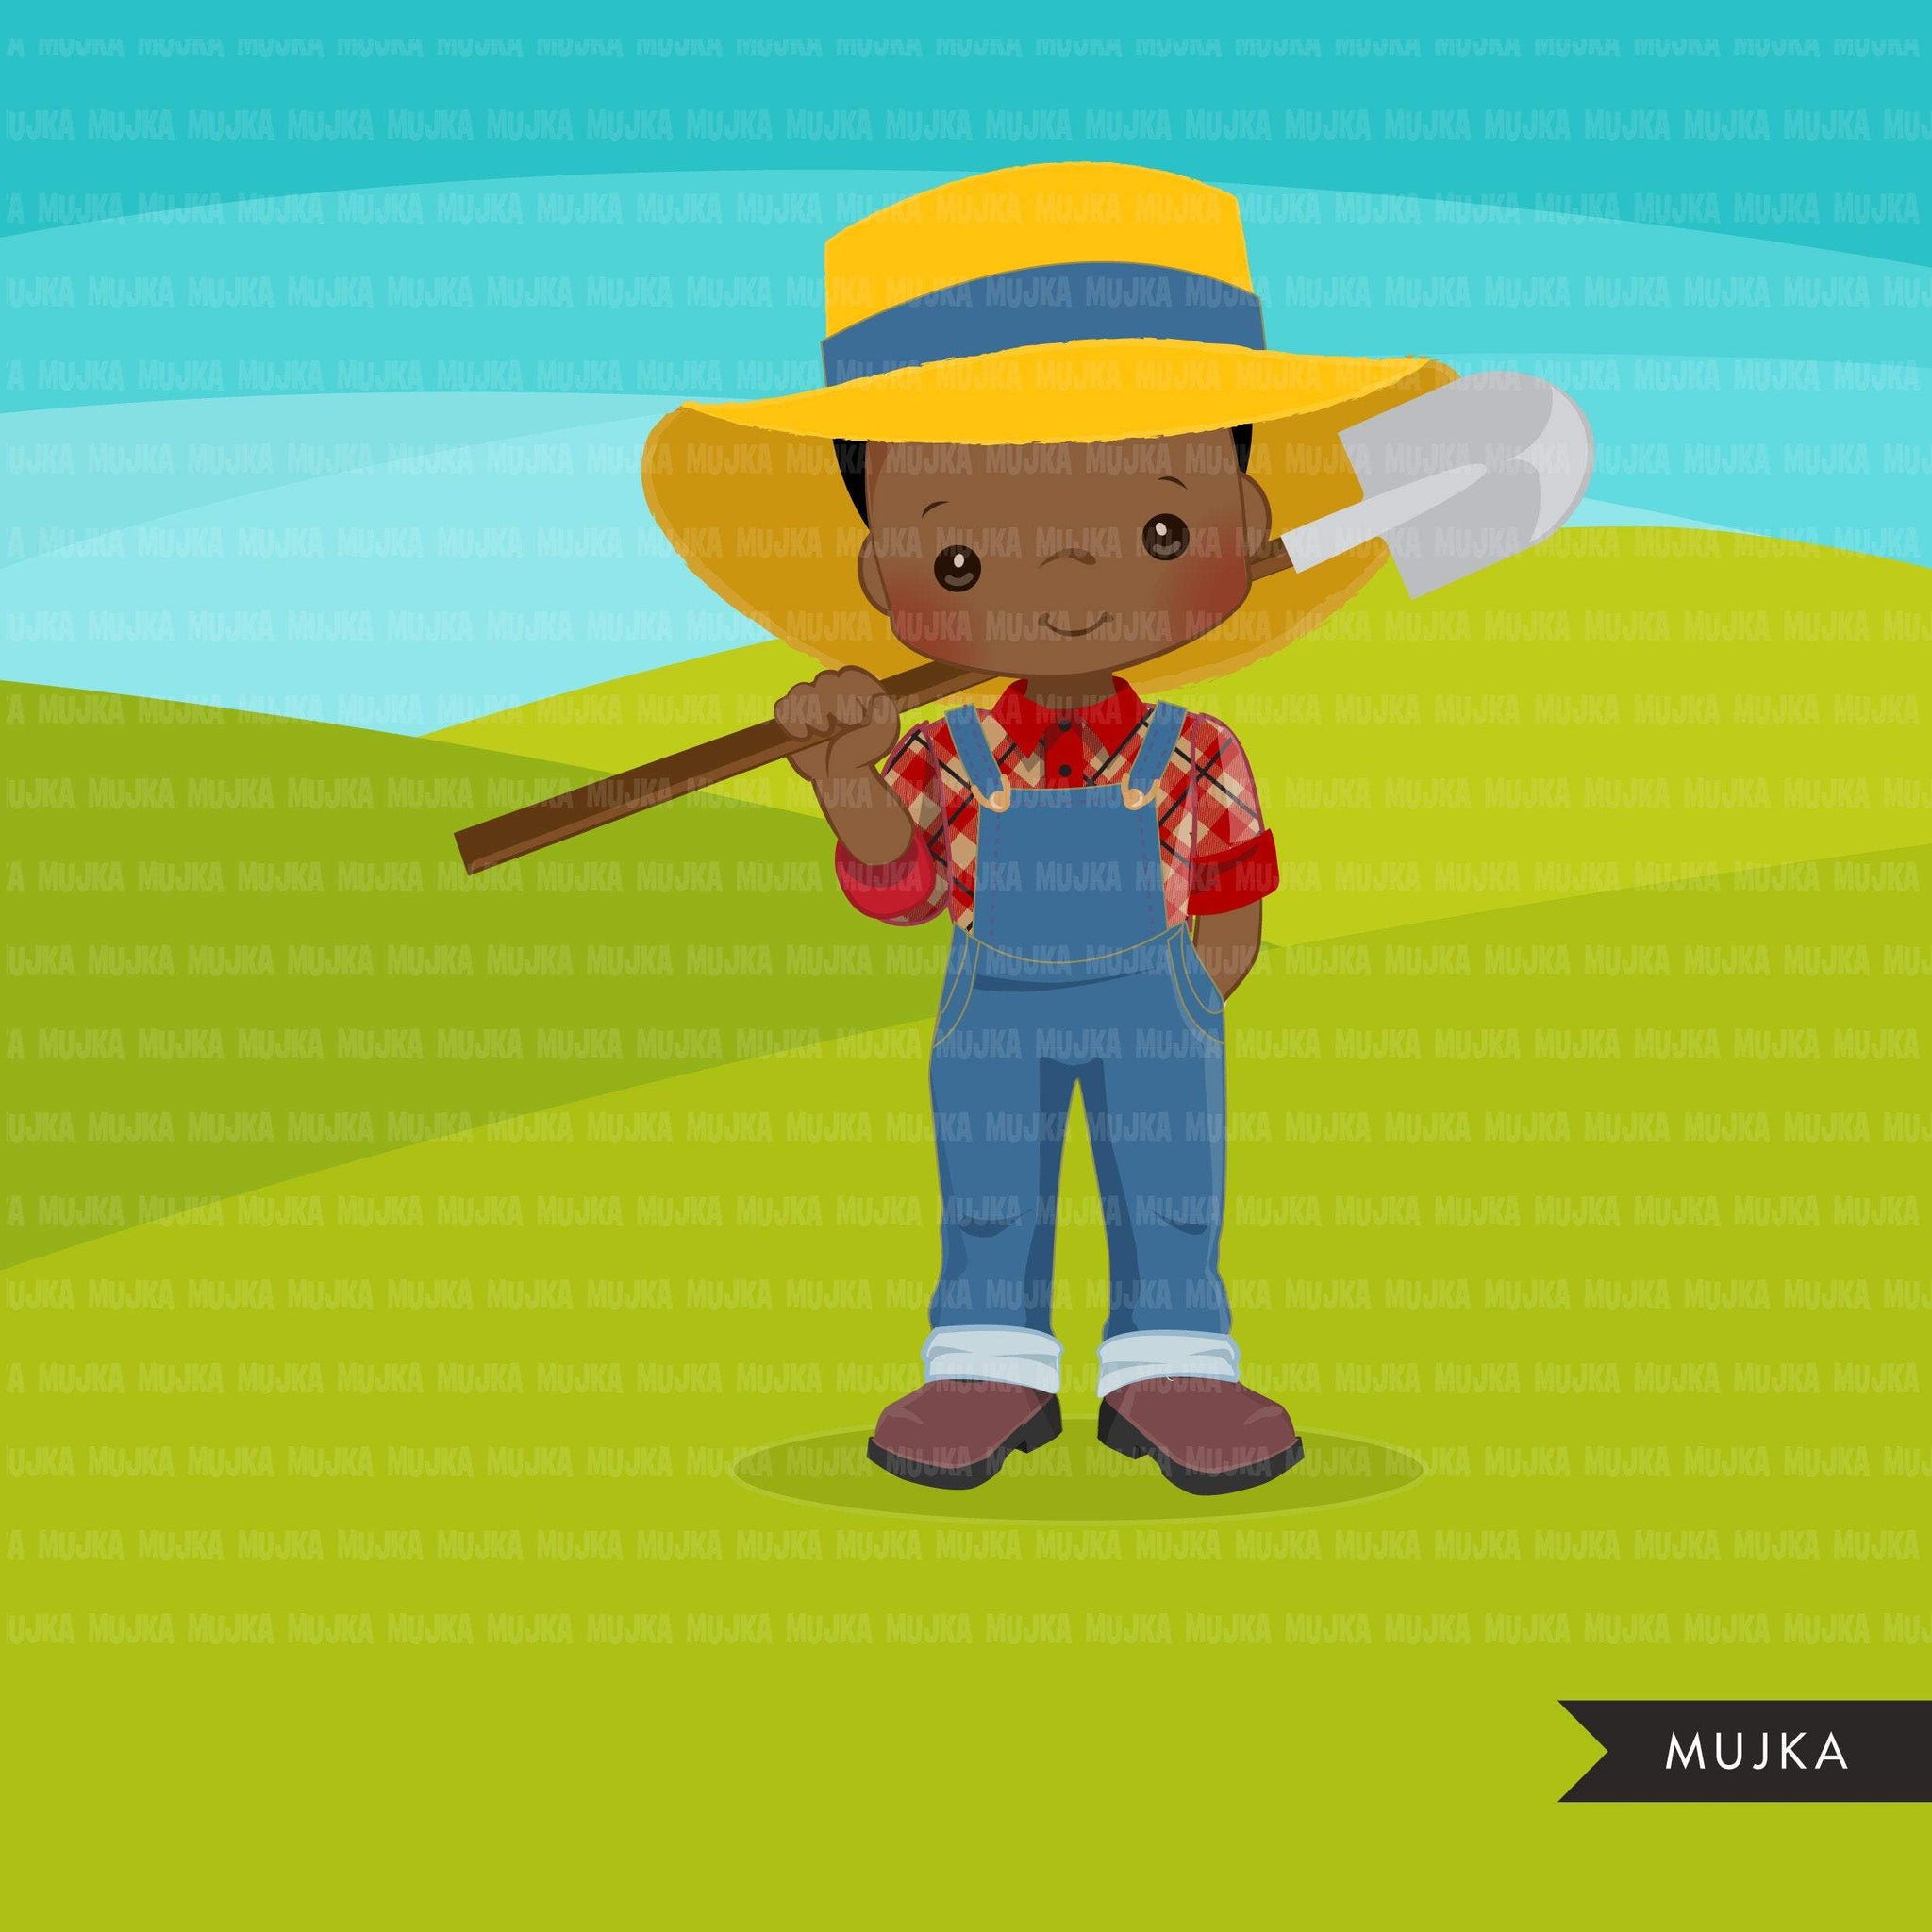 Afro black Farmer Boys clipart, farmer characters with shovel, farmer hat, country graphics, country boy with hat